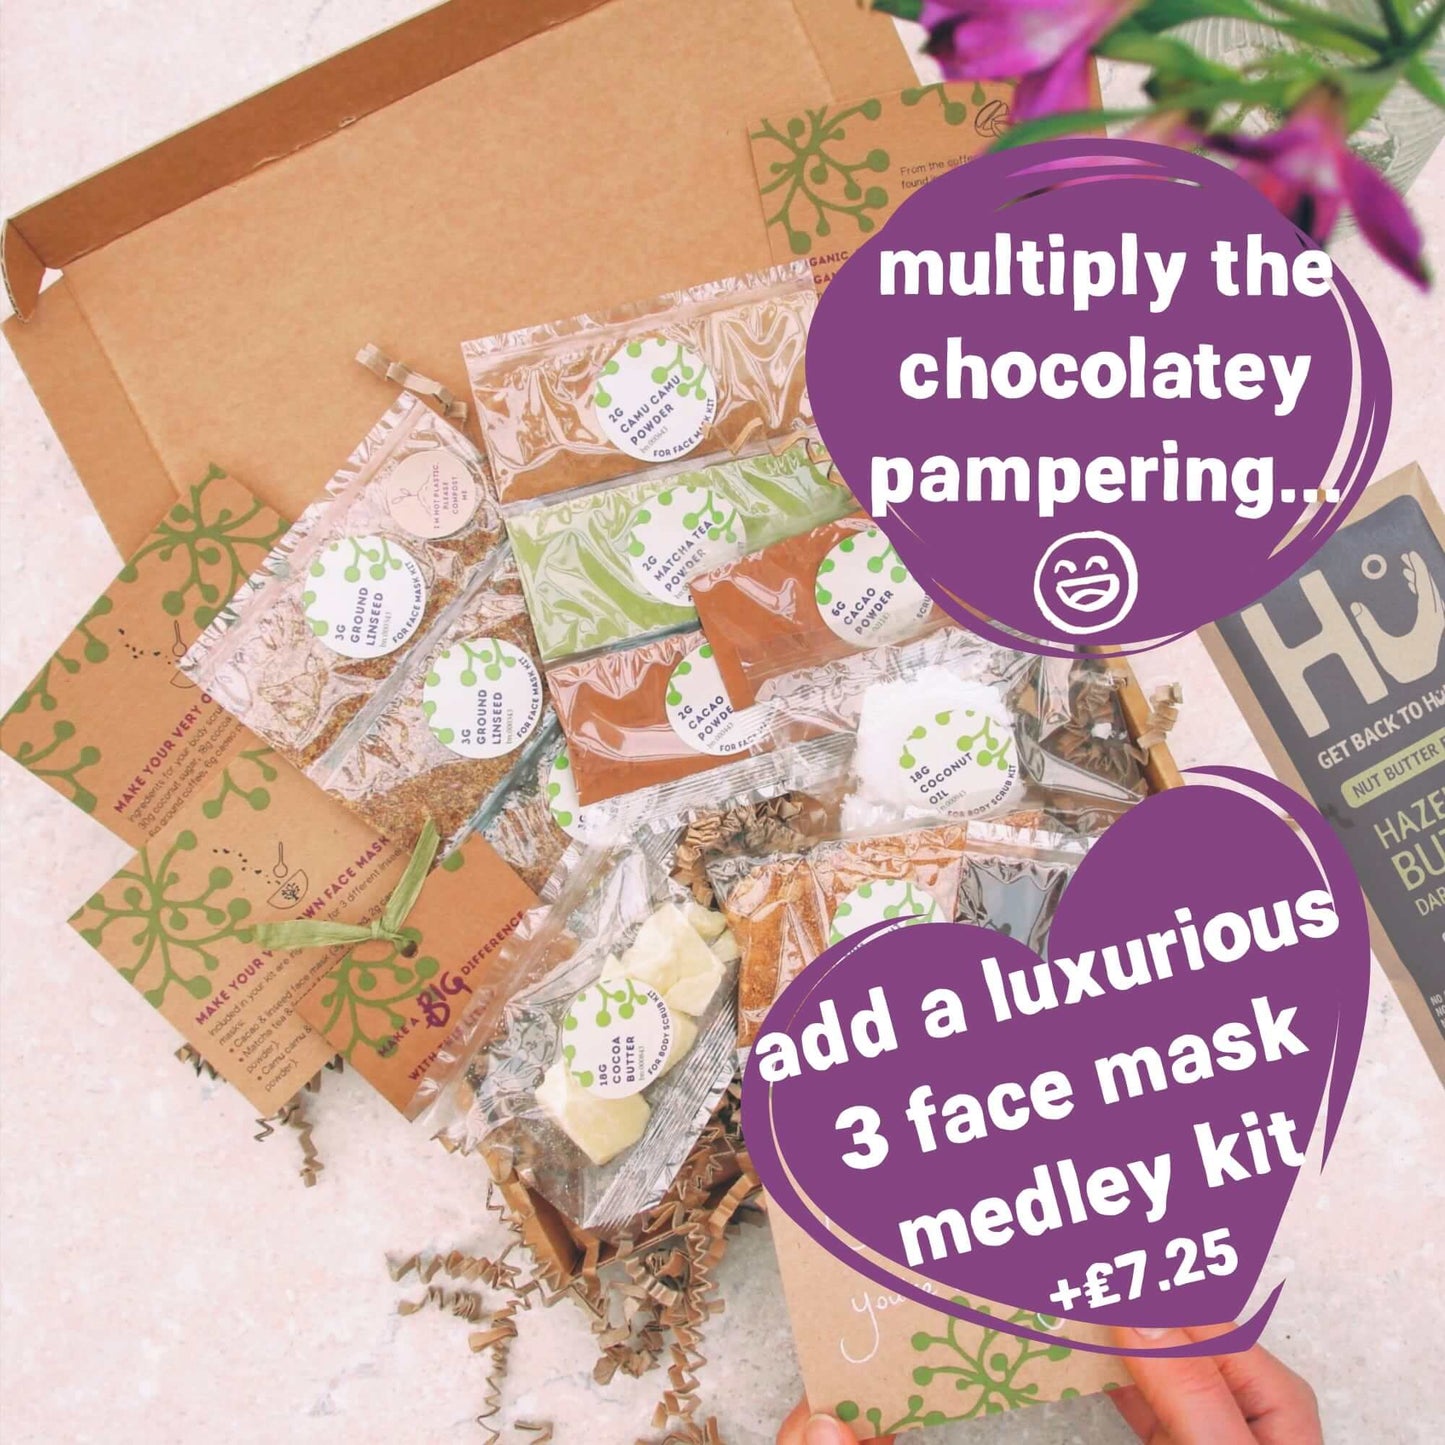 add 3 pampering face mask kits to best friend gift